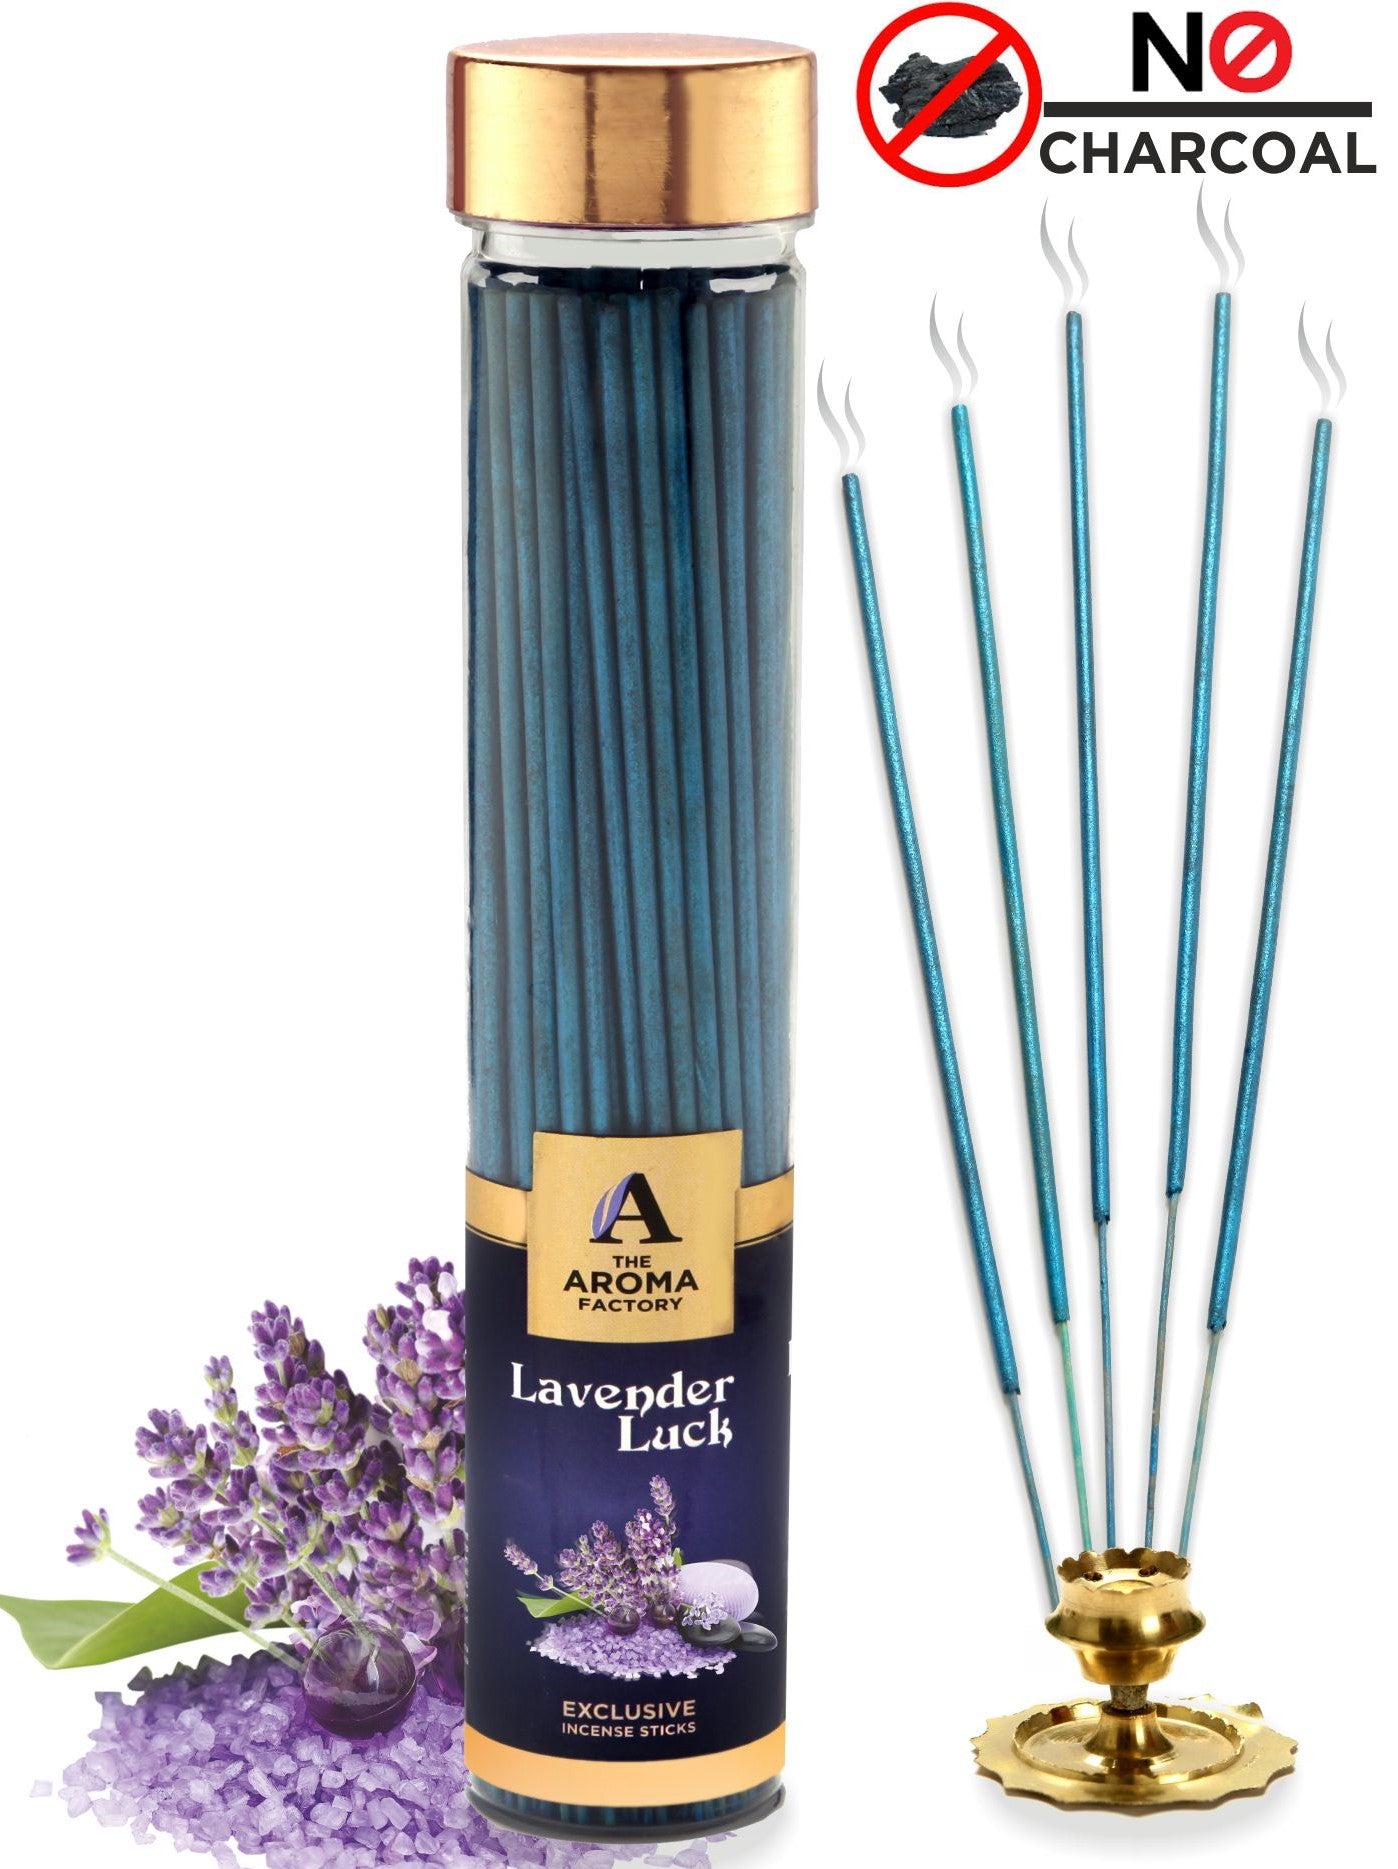 The Aroma Factory Lavender Luck Incense Sticks Agarbatti (Charcoal Free & 100% Herbal) Bottle, 100g